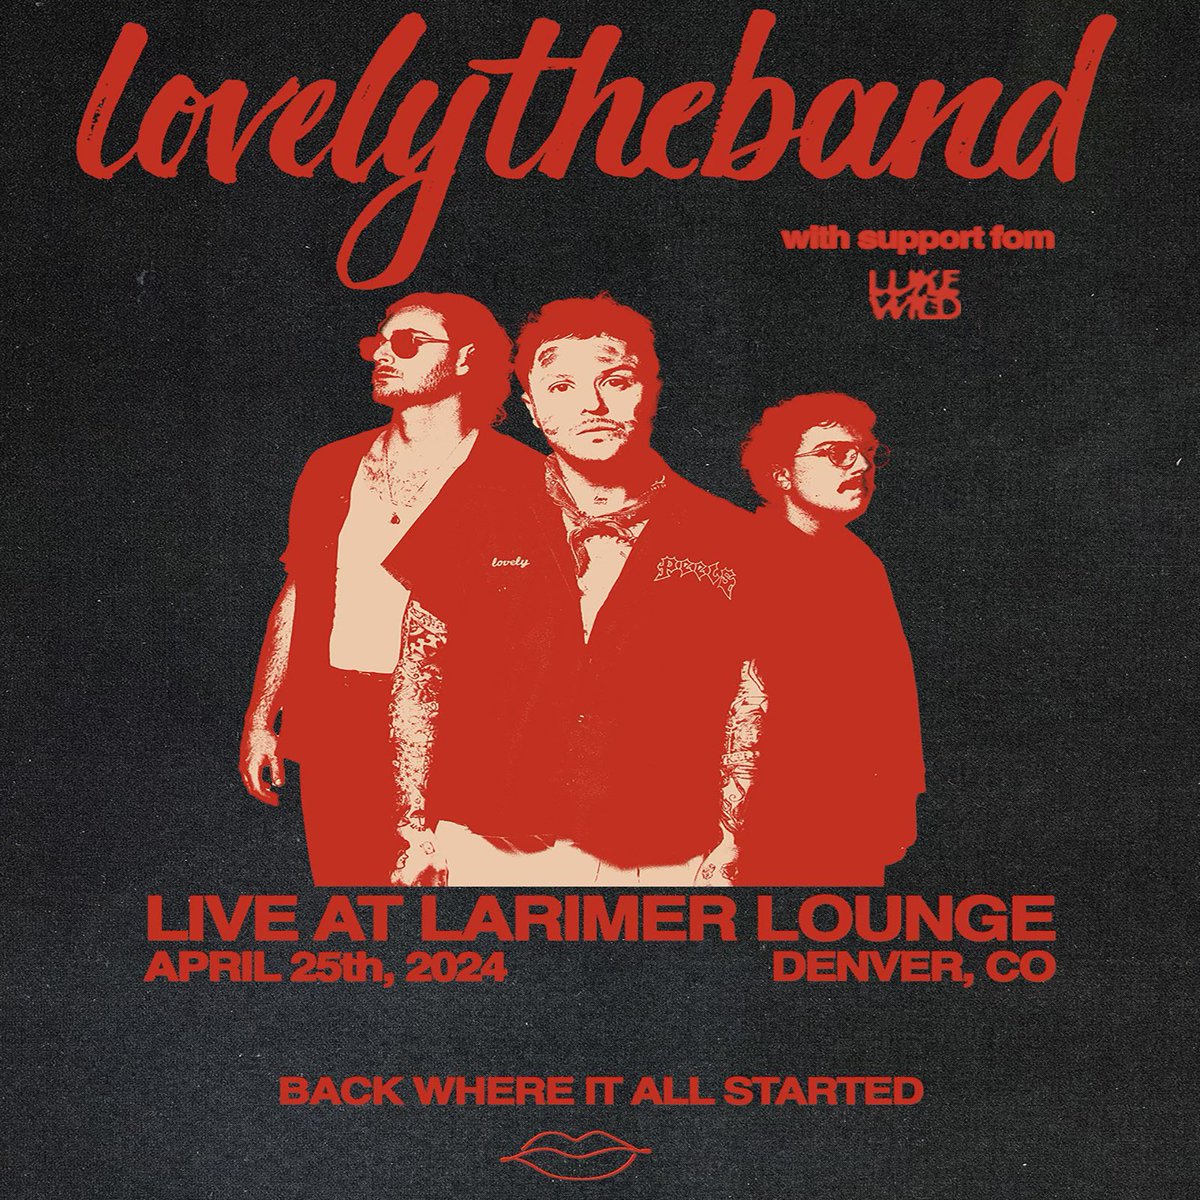 🚨ON SALE NOW🚨 Before heading to Mars with @lovelytheband , make your way to Larimer Lounge on April 25th for their show with support from Luke Wild , presented by @KTCLchannel933 ! 🌌🌠Tickets on sale NOW ⬇️ tinyurl.com/lovelythebandd…